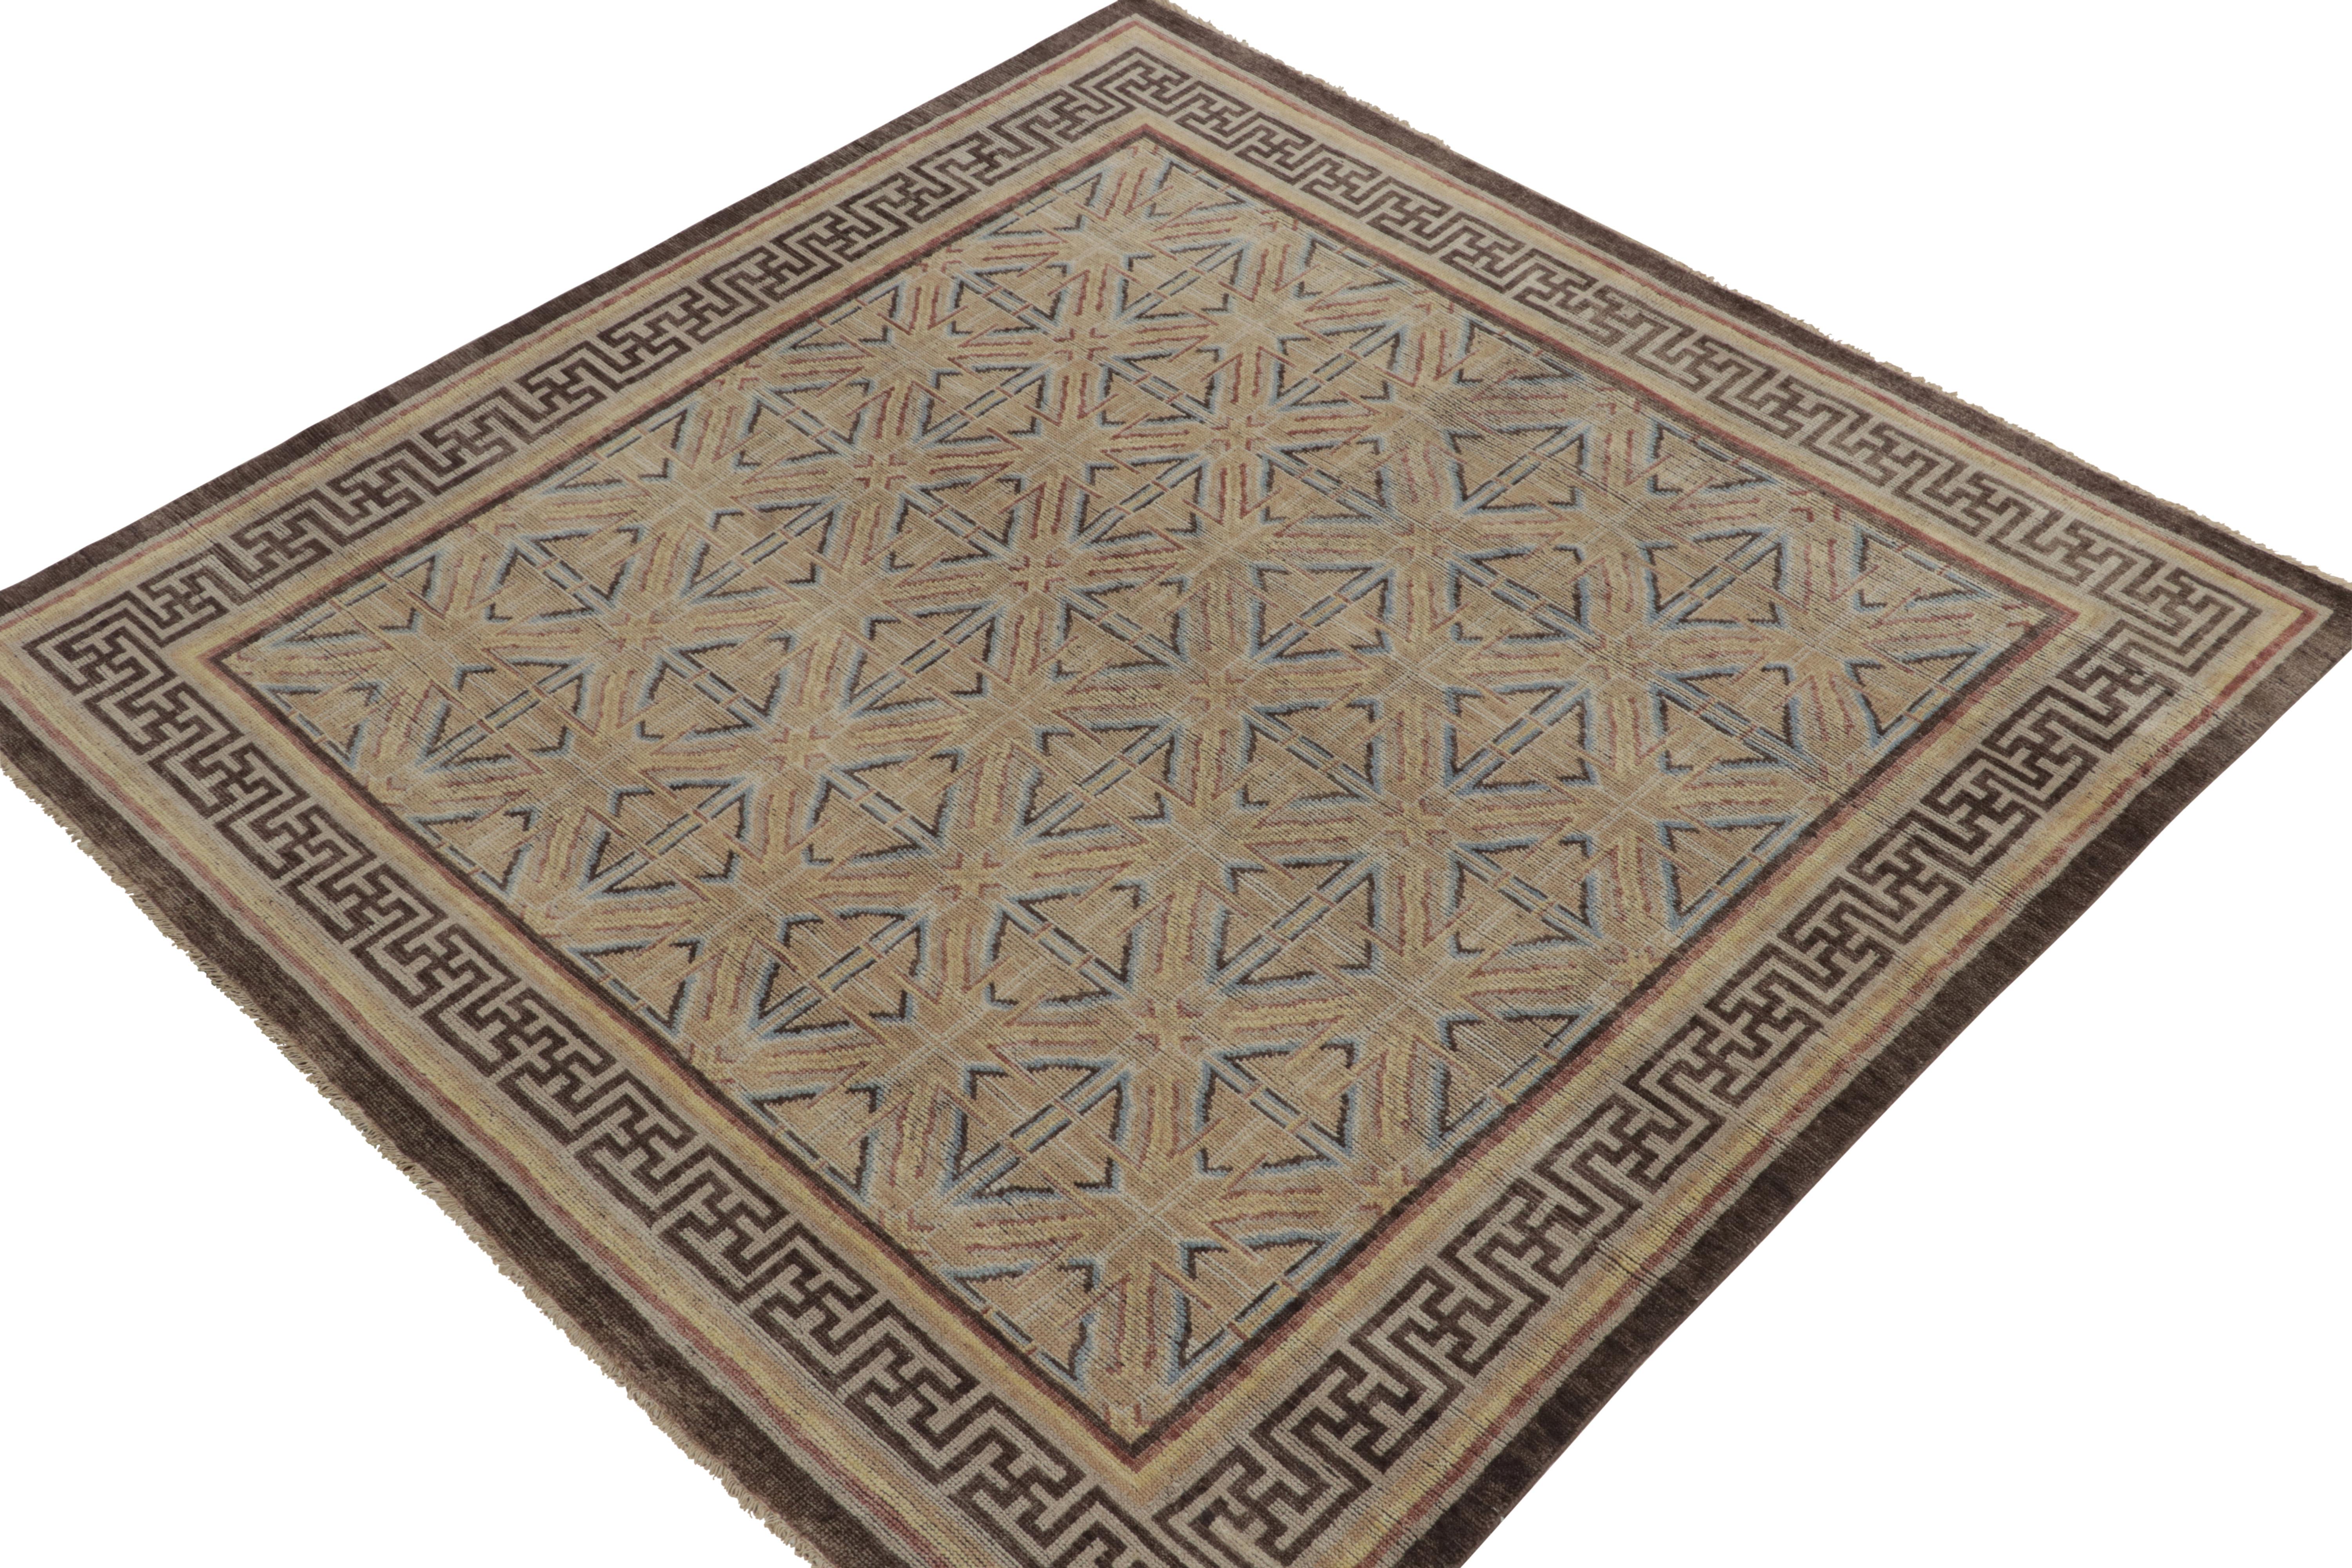 Hand-knotted in the softest quality wool, this 8x8 square rug joins the classic styles of our ever-growing Burano Collection. 

Particularly inspired by the 18th century Chinese dynastic pieces, the deco style diamond pattern rejoices in a muted